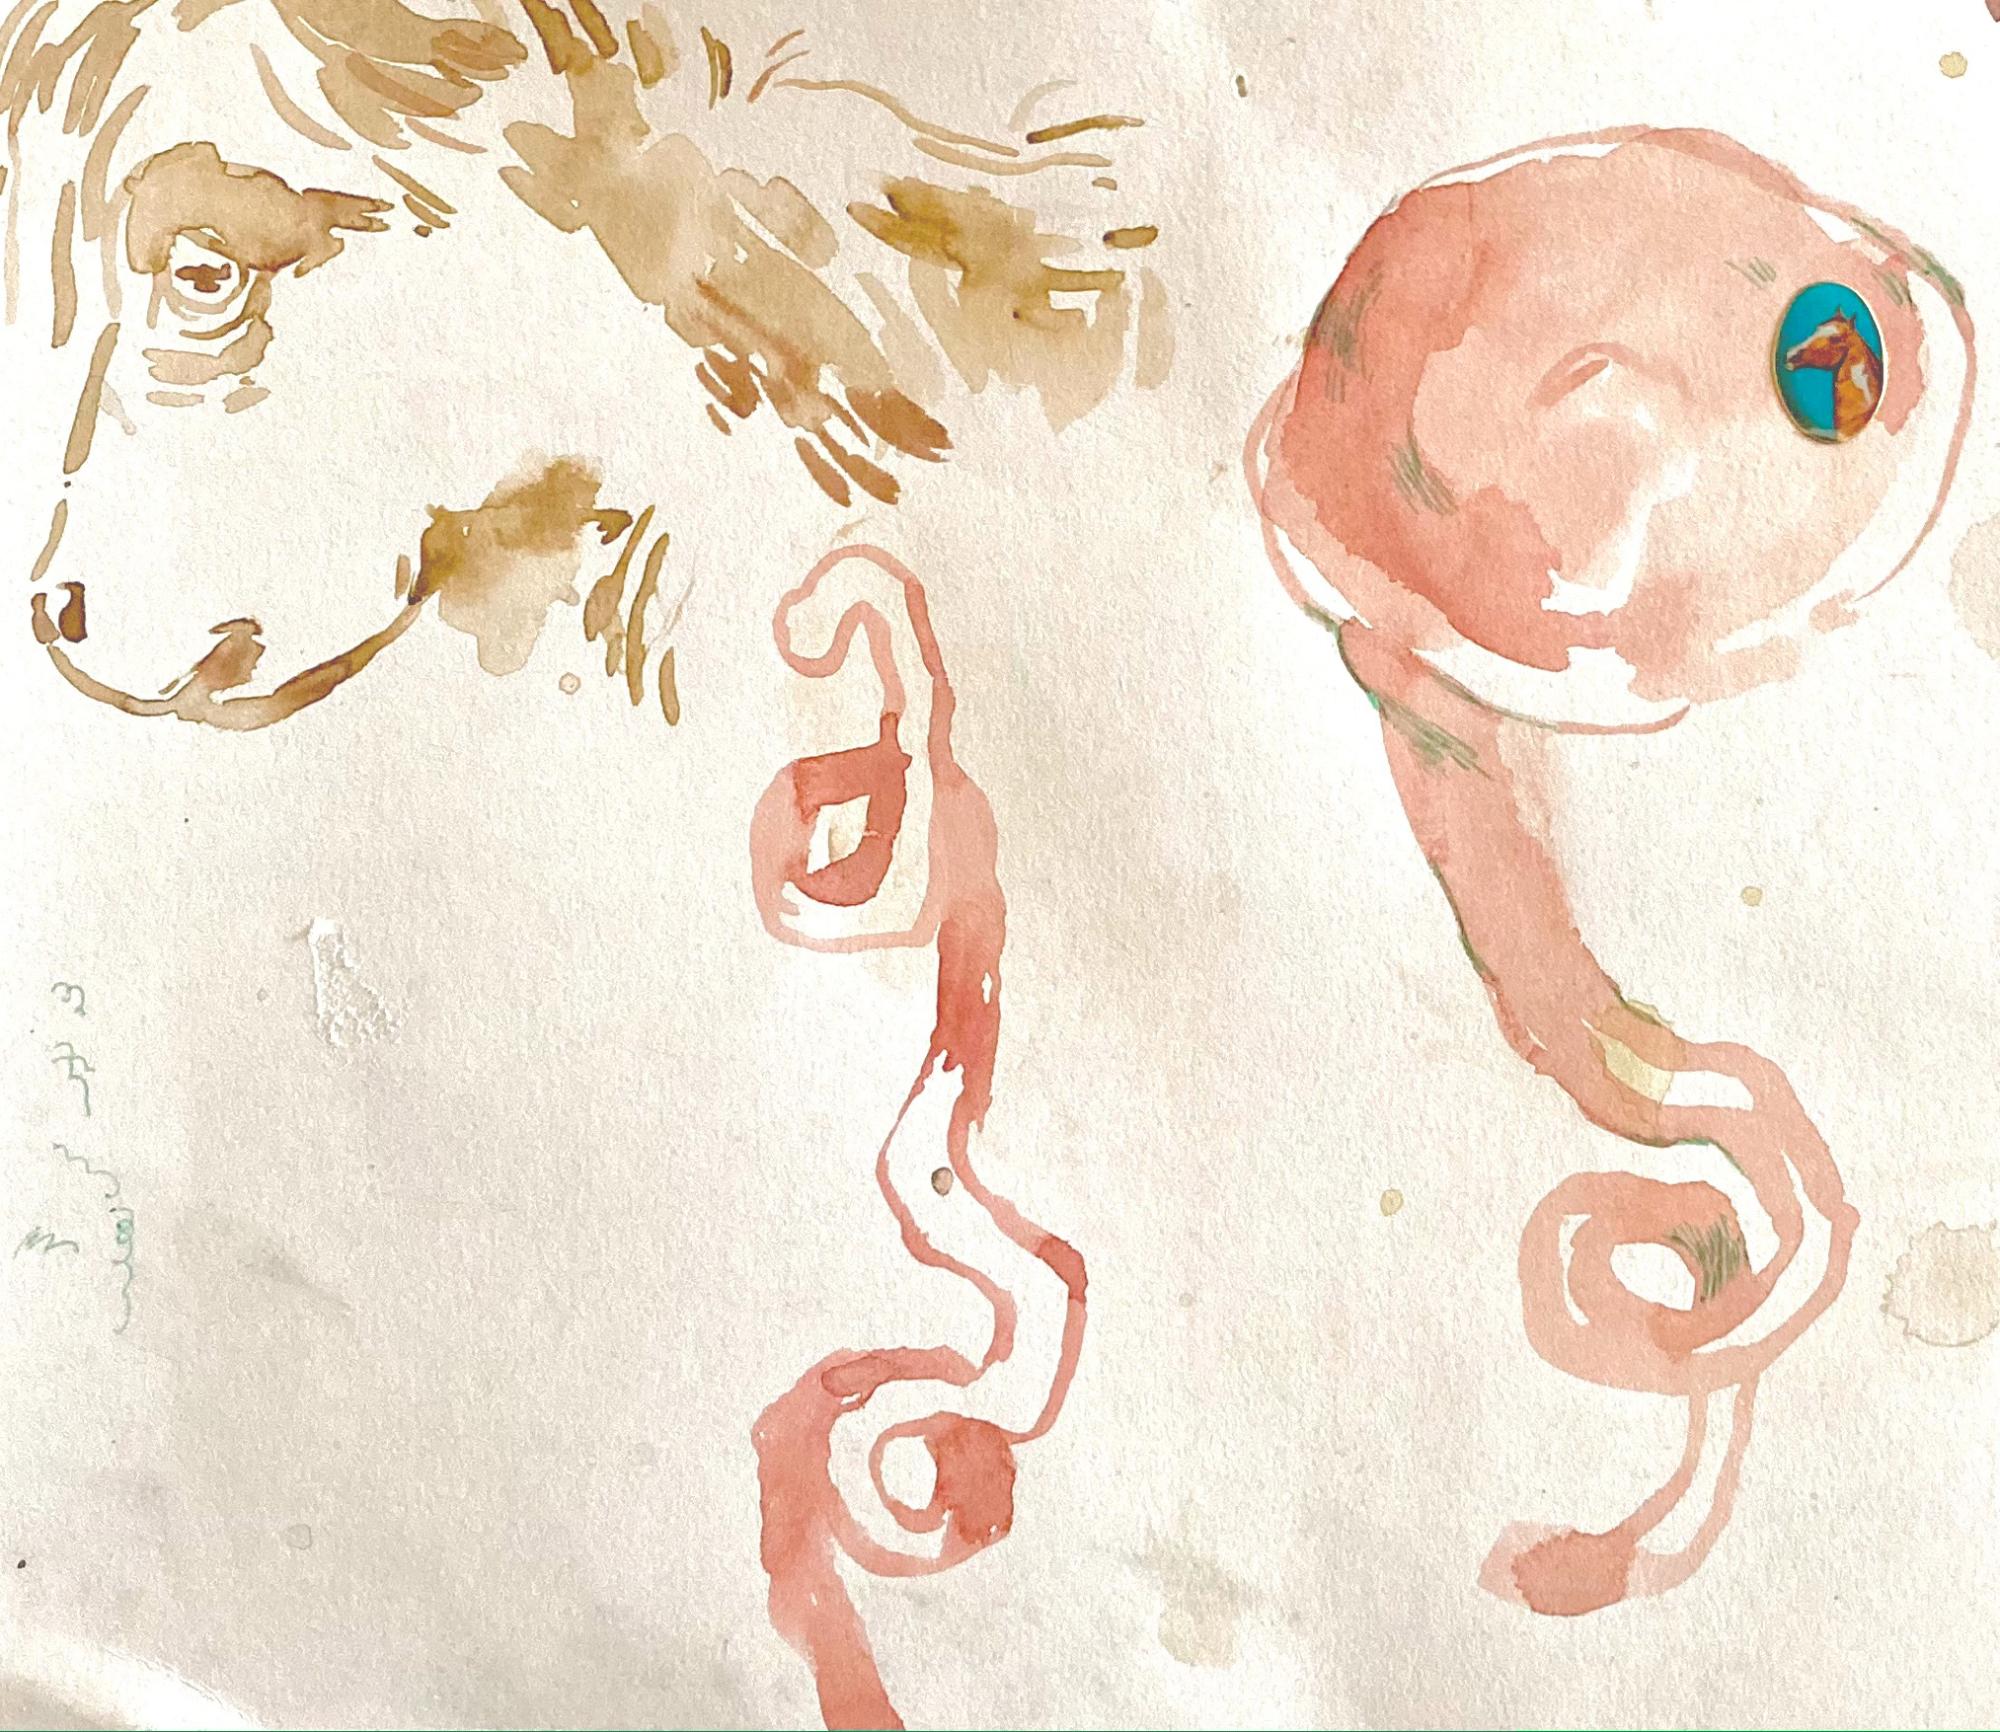 Watercolour drawing. In the top left corner is a horse's head. Underneath is a twisting apple peel reaching towards the head. To the right of the page is an apple with peel hanging down and a sticker of another horse's head on it.